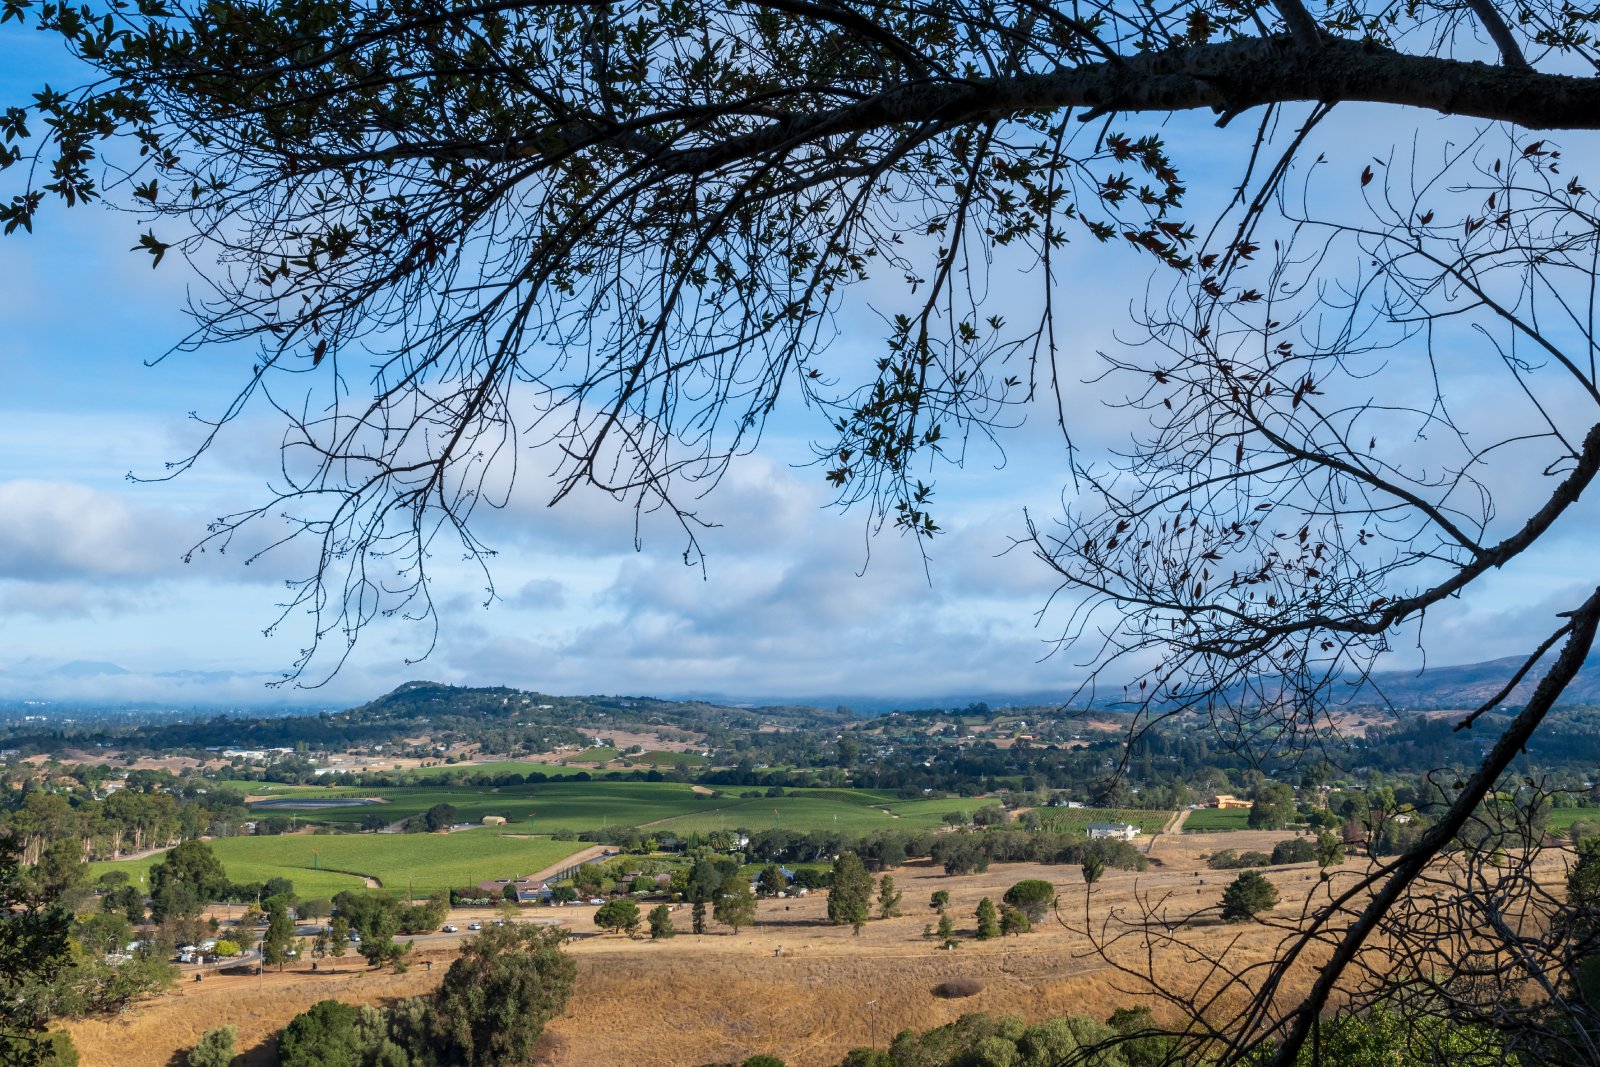 <p class="wp-caption-text">Image Credit: Shutterstock / AlessandraRC</p>  <p><span>Skyline Wilderness Park presents a different side of Napa Valley that appeals to outdoor enthusiasts and nature lovers. Spanning over 850 acres, this park offers a variety of trails for hiking, mountain biking, and horseback riding, each providing unique views of the valley and its surrounding natural beauty. The park is not only a haven for recreational activities but also a sanctuary for local wildlife, offering visitors a chance to connect with the natural environment of Napa Valley. The diverse landscapes, from dense forests to open meadows, make Skyline Wilderness Park a must-visit for those exploring the great outdoors.</span></p>